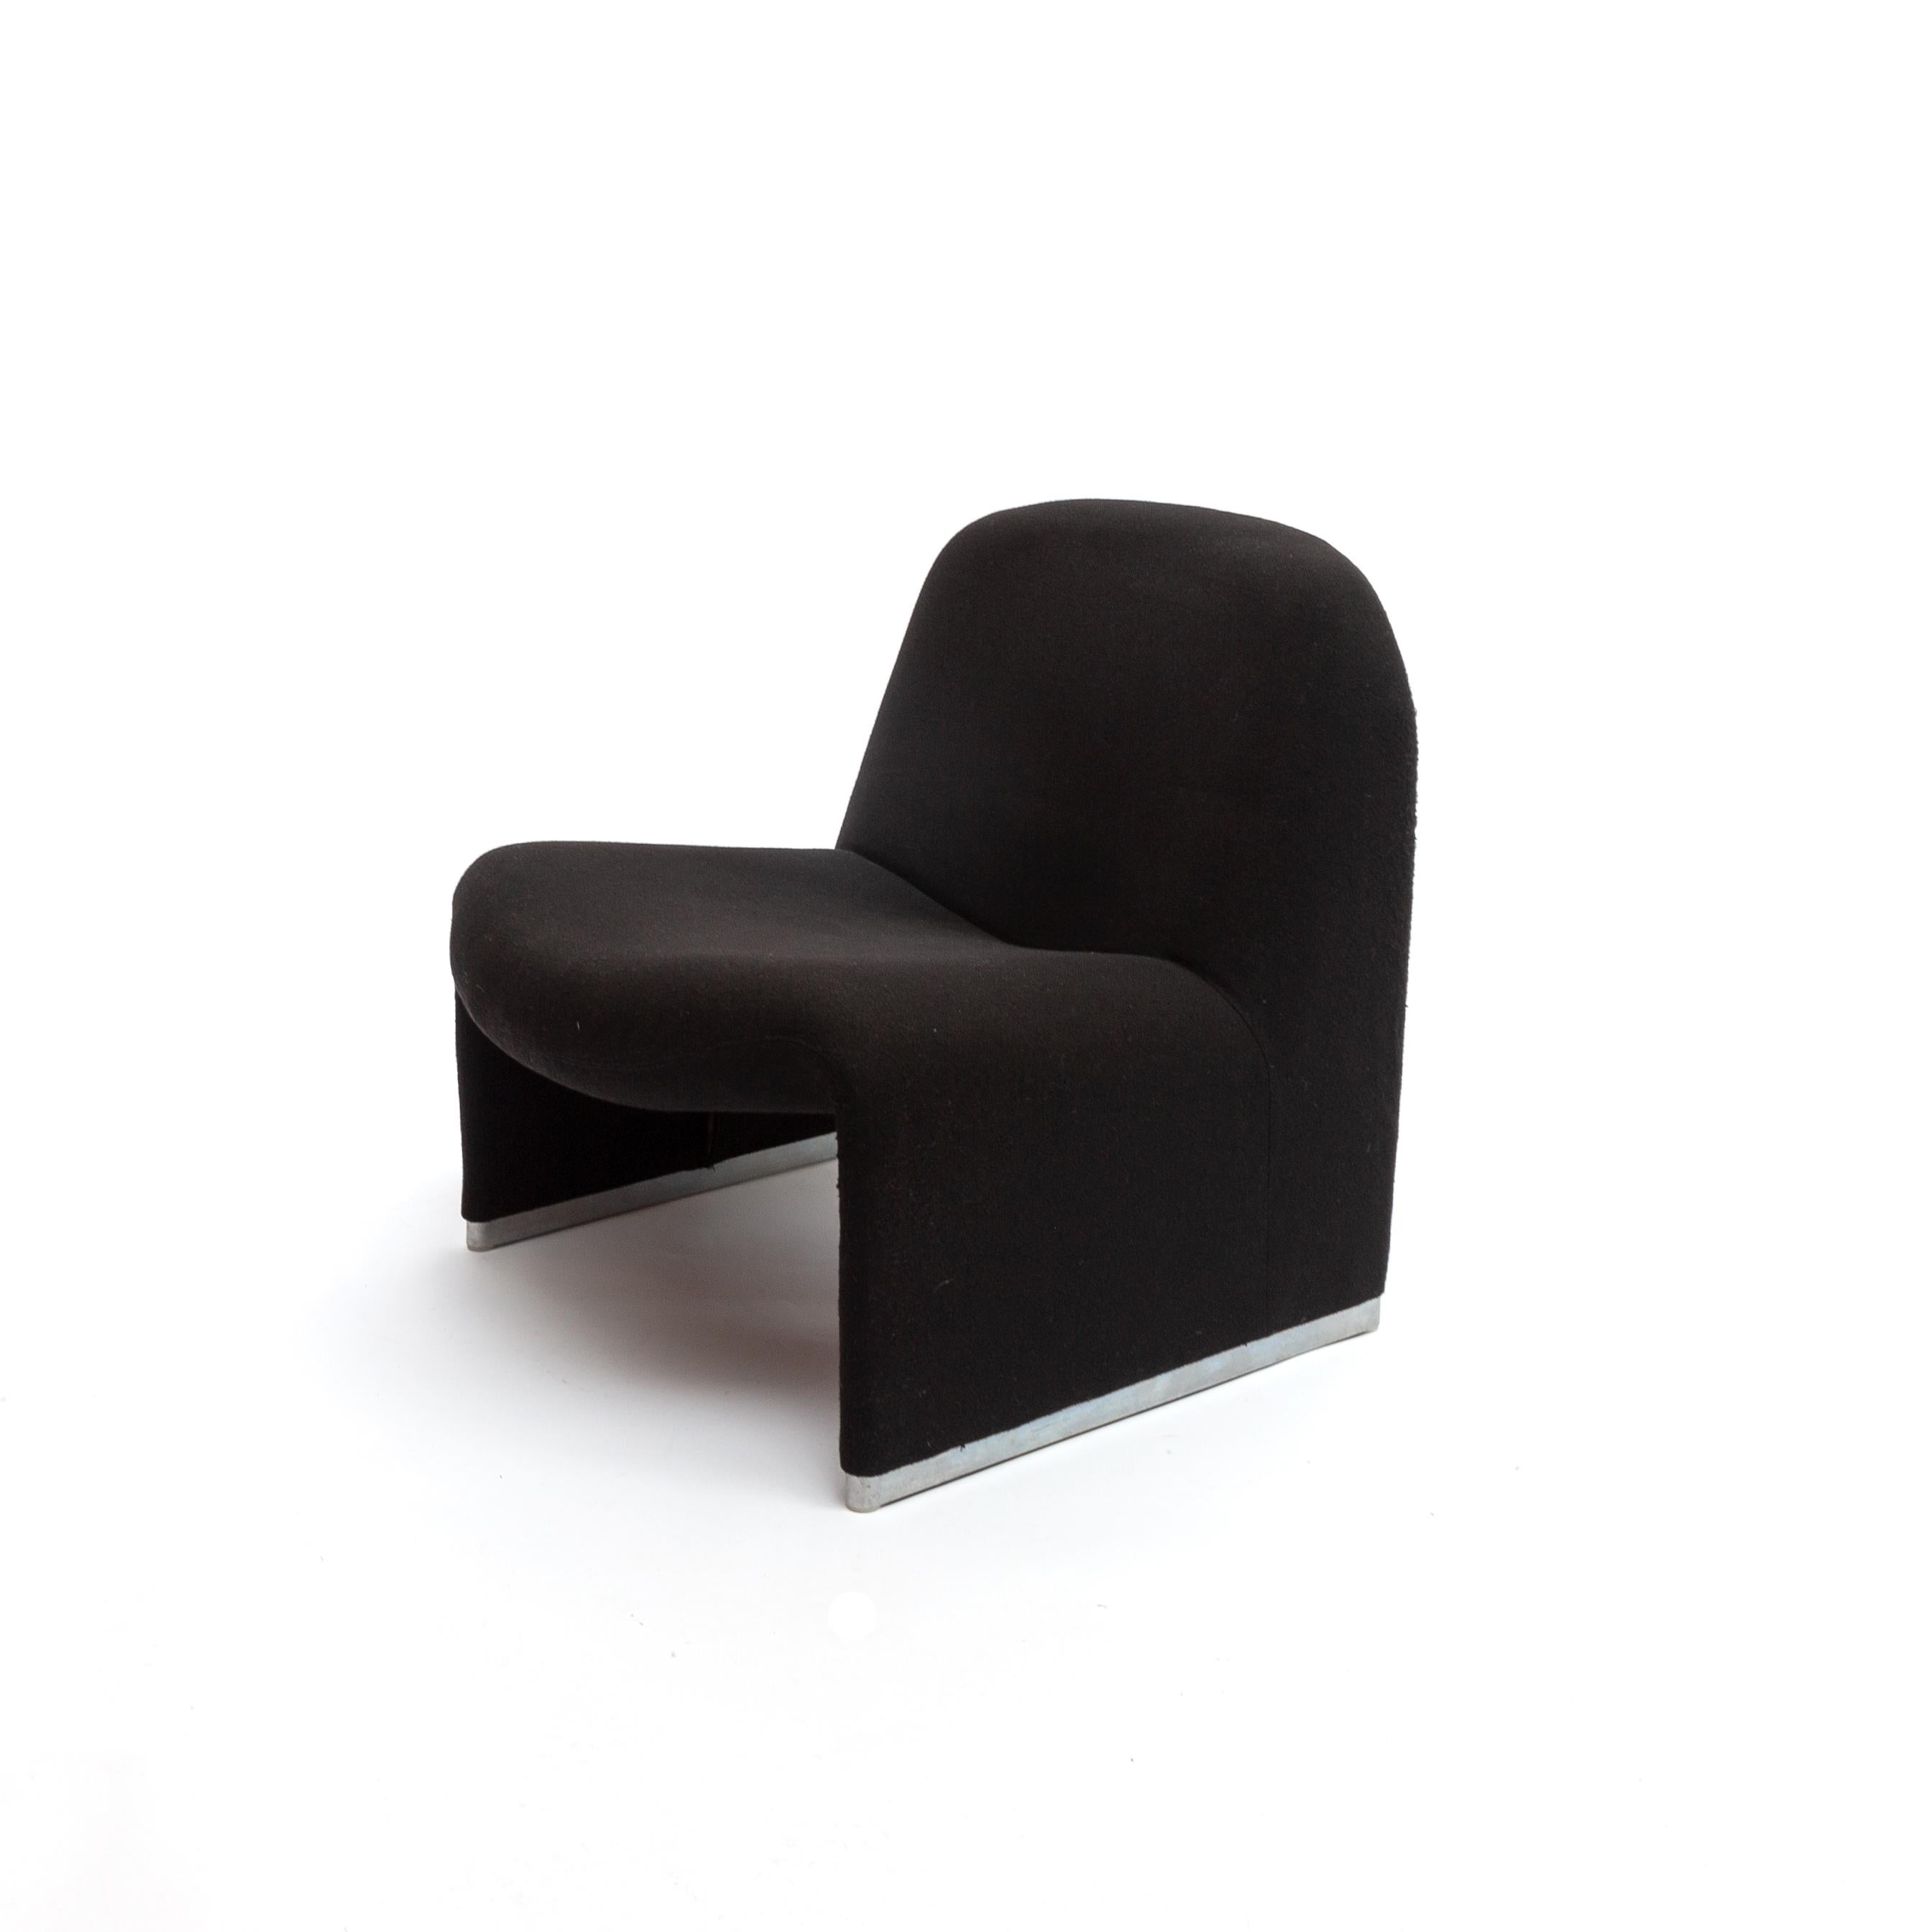 Black Alky armchair by Giancarlo Piretti. Produced by Castelli in Italy in the 1970s. Very comfortable. In original black Van Der Ploeg Wool fabric. The item is in good vintage condition. Its organic shape creates a great comfort.